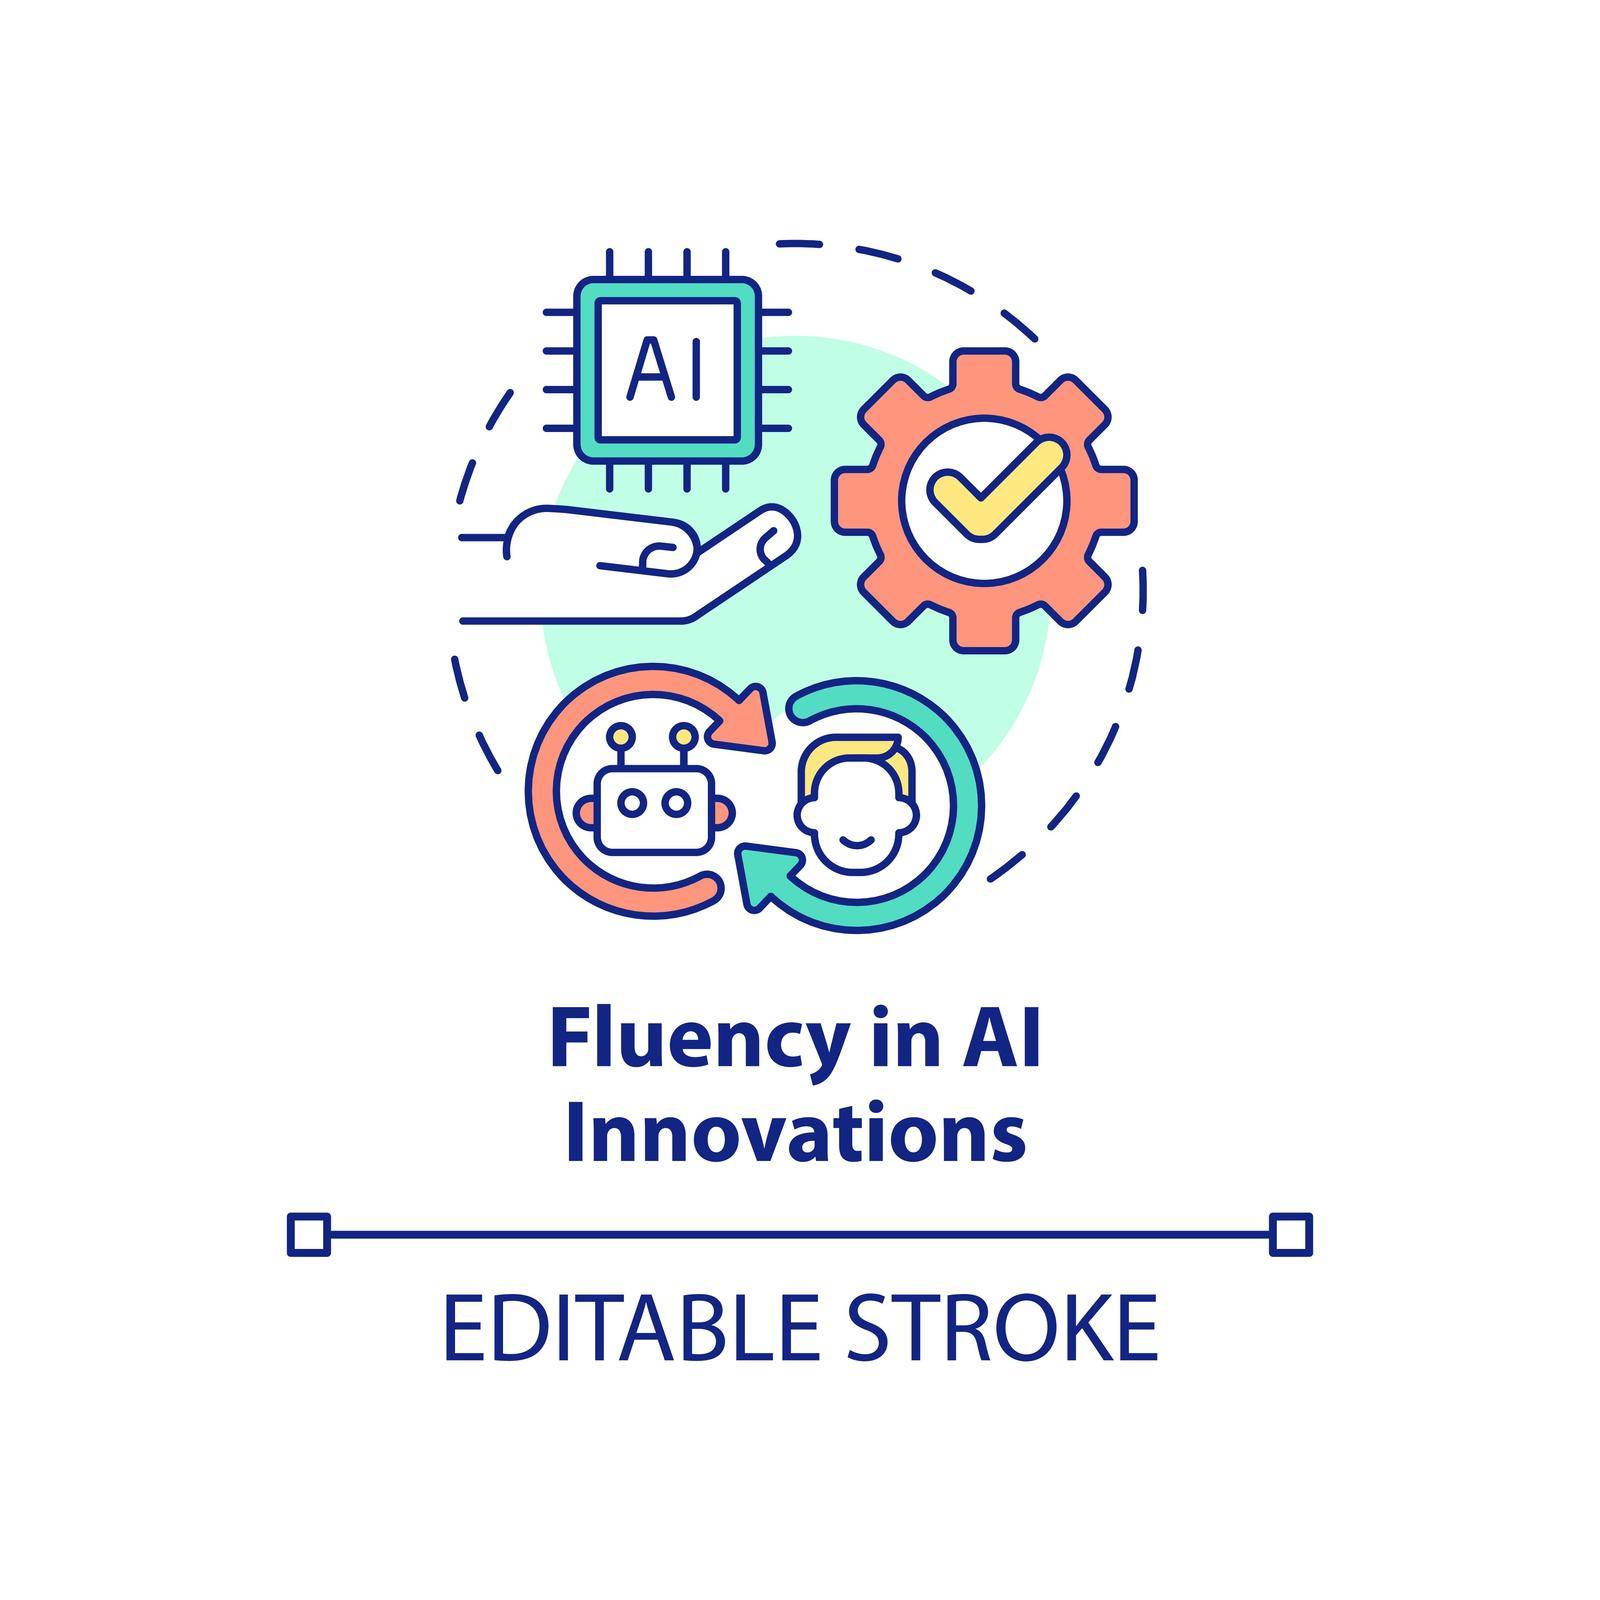 Fluency in AI innovations concept icon by bsd studio